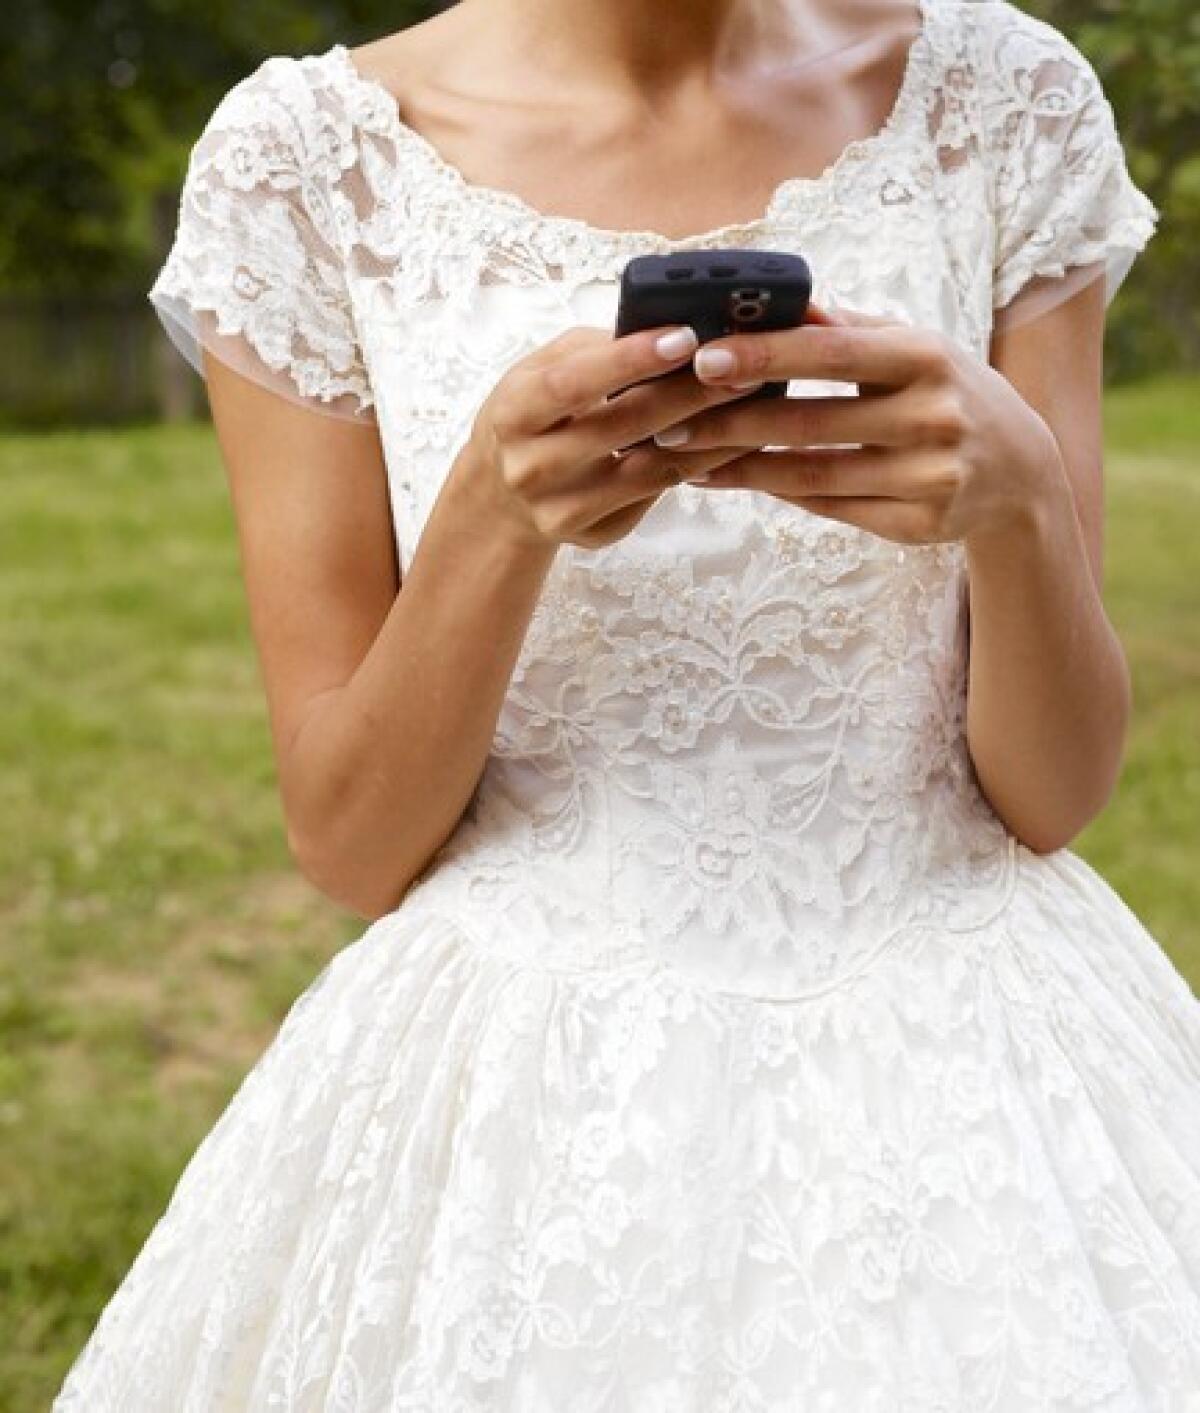 Focus on being present at the wedding rather than getting distracted by the digital world.